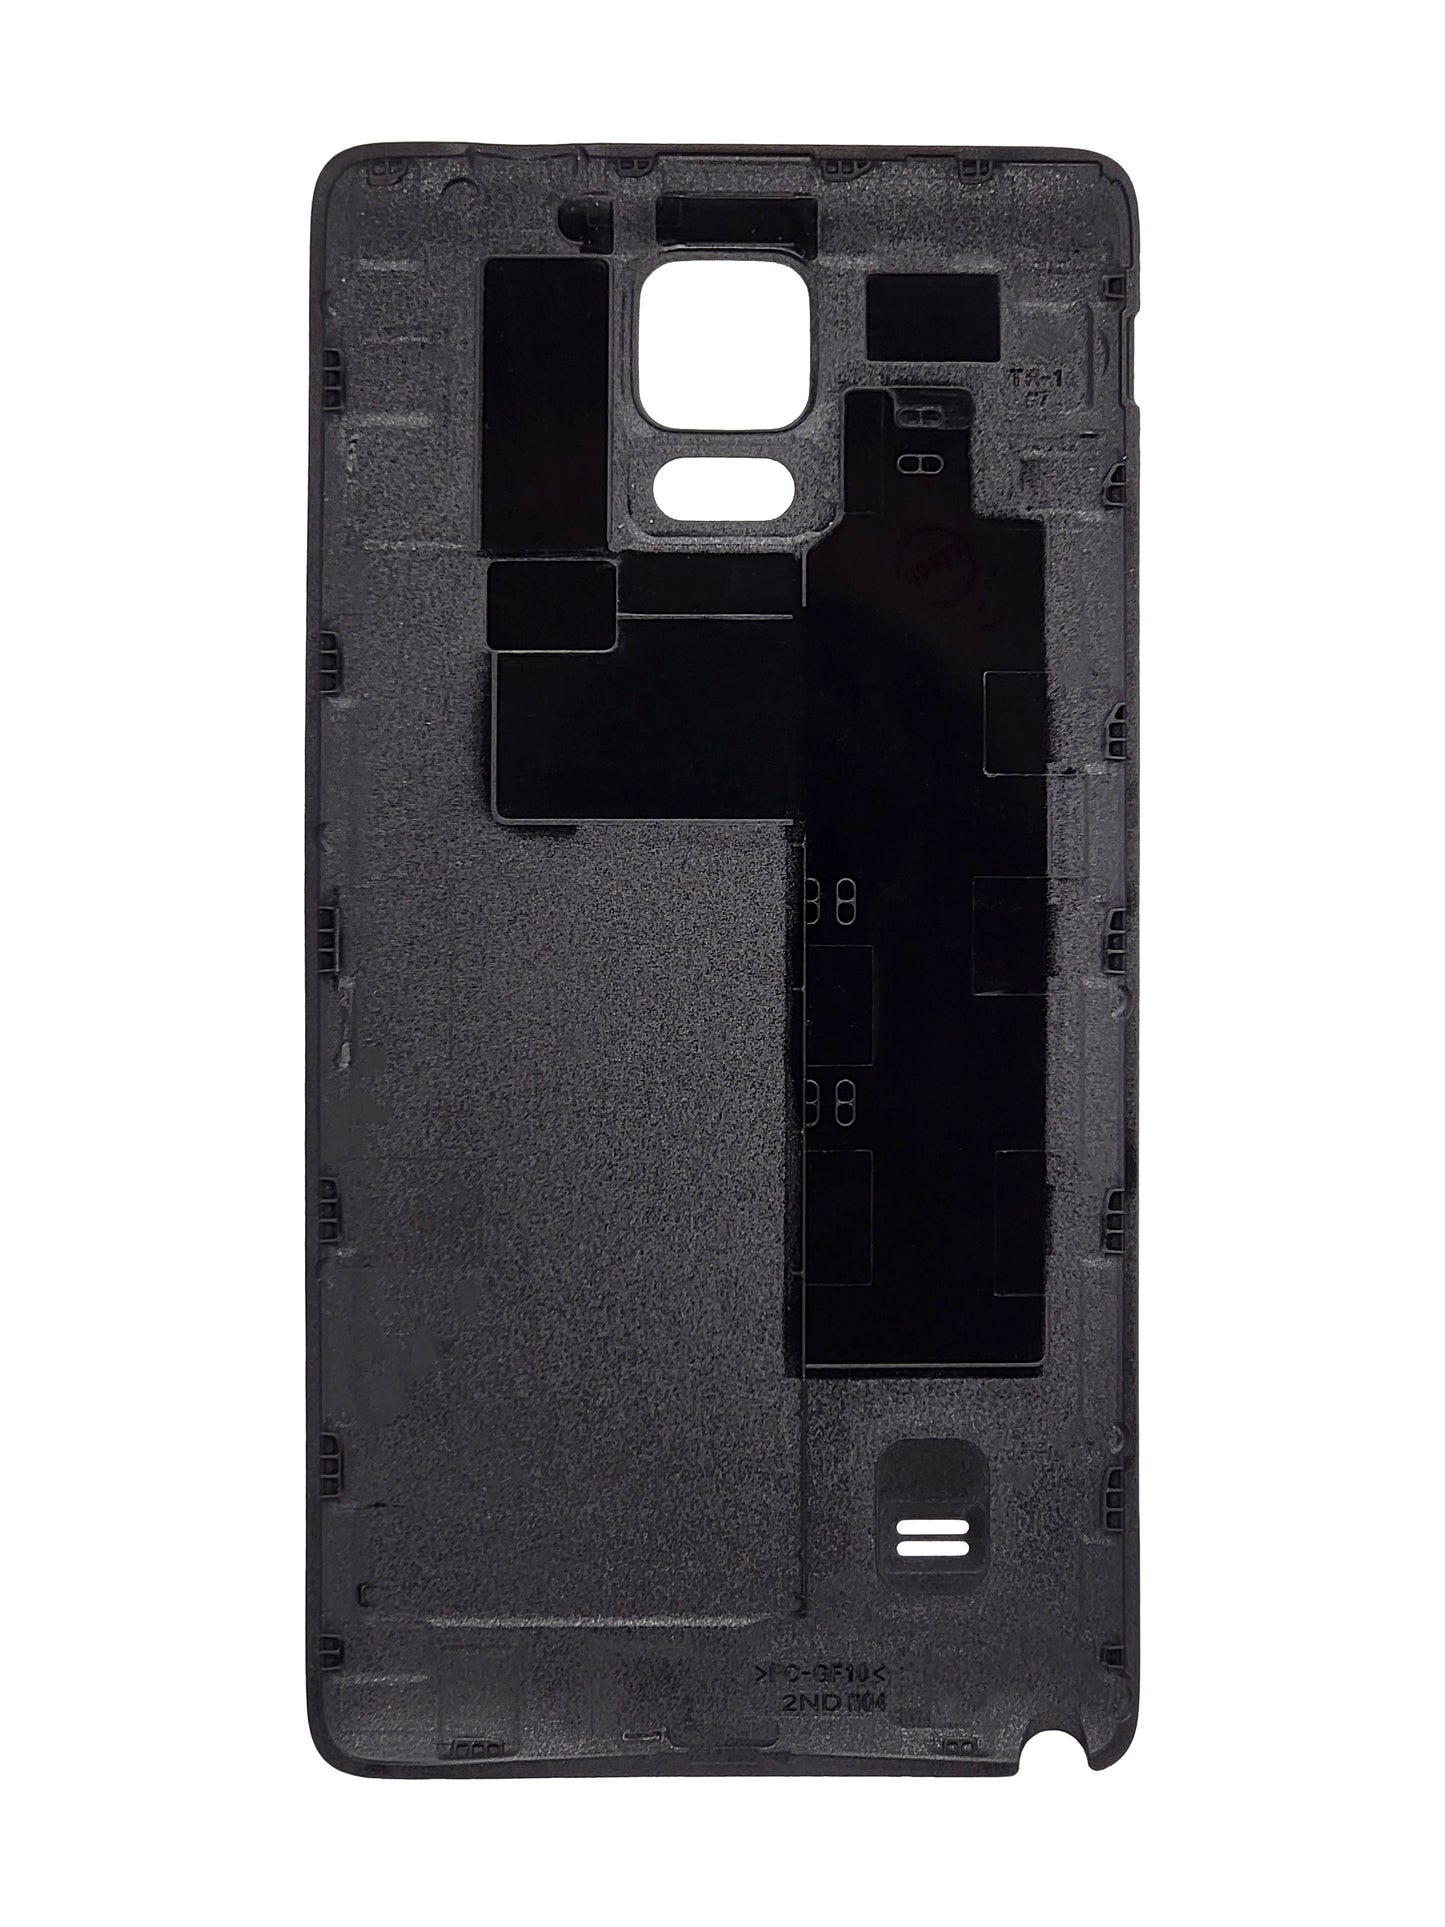 SGN Note 4 Back Cover (Black)